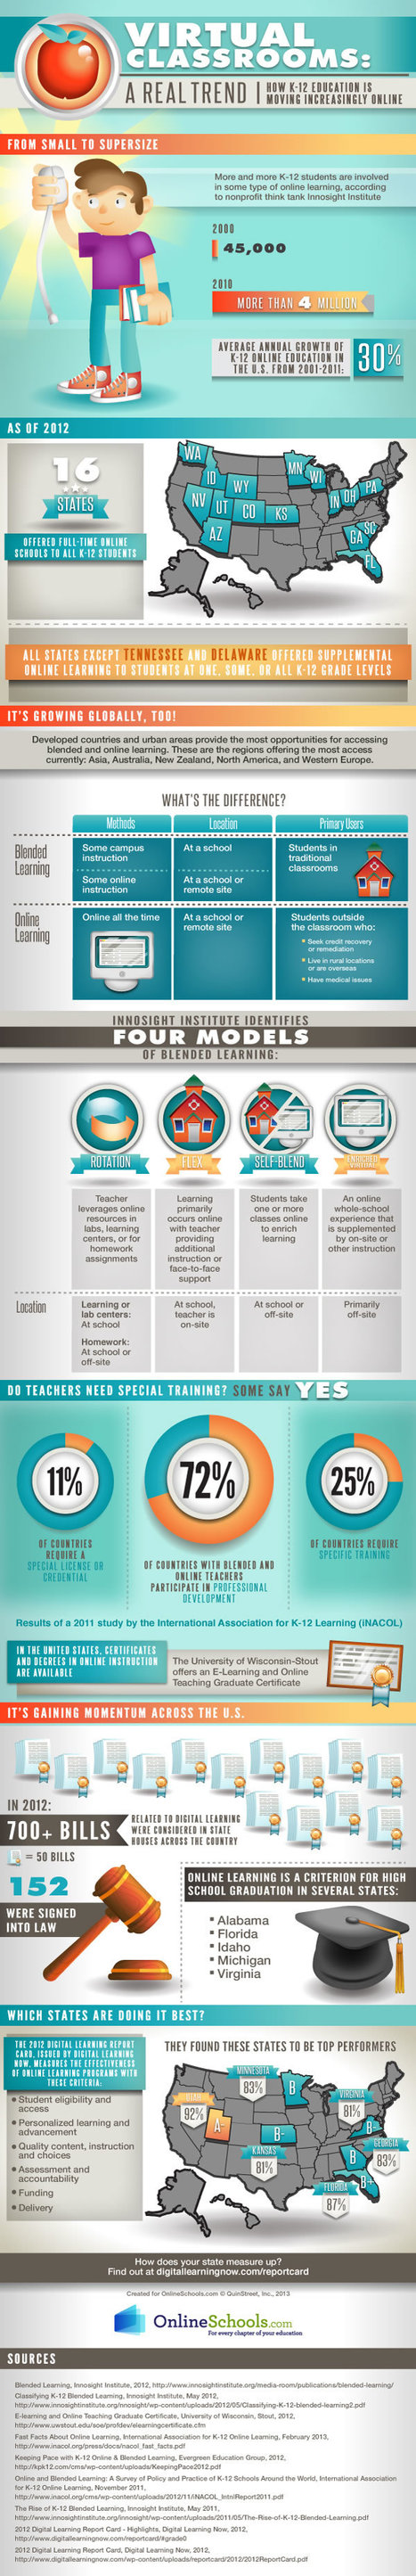 The Teacher's Quick Guide To Blended Learning [... | aprendizaje mixto | Scoop.it